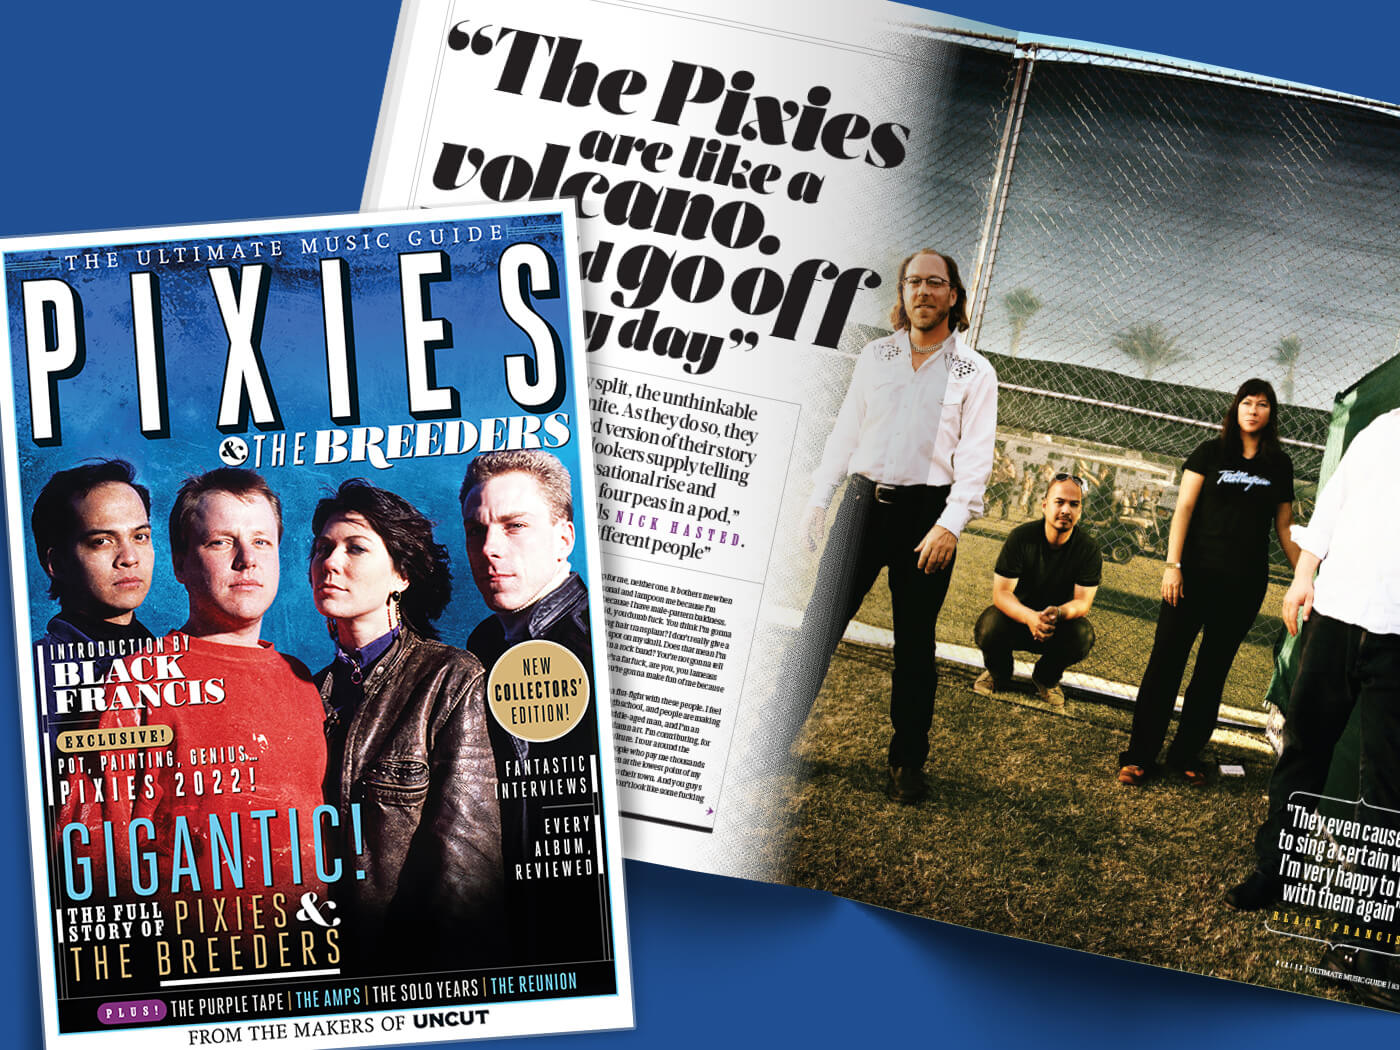 Introducing the Ultimate Music Guide to Pixies